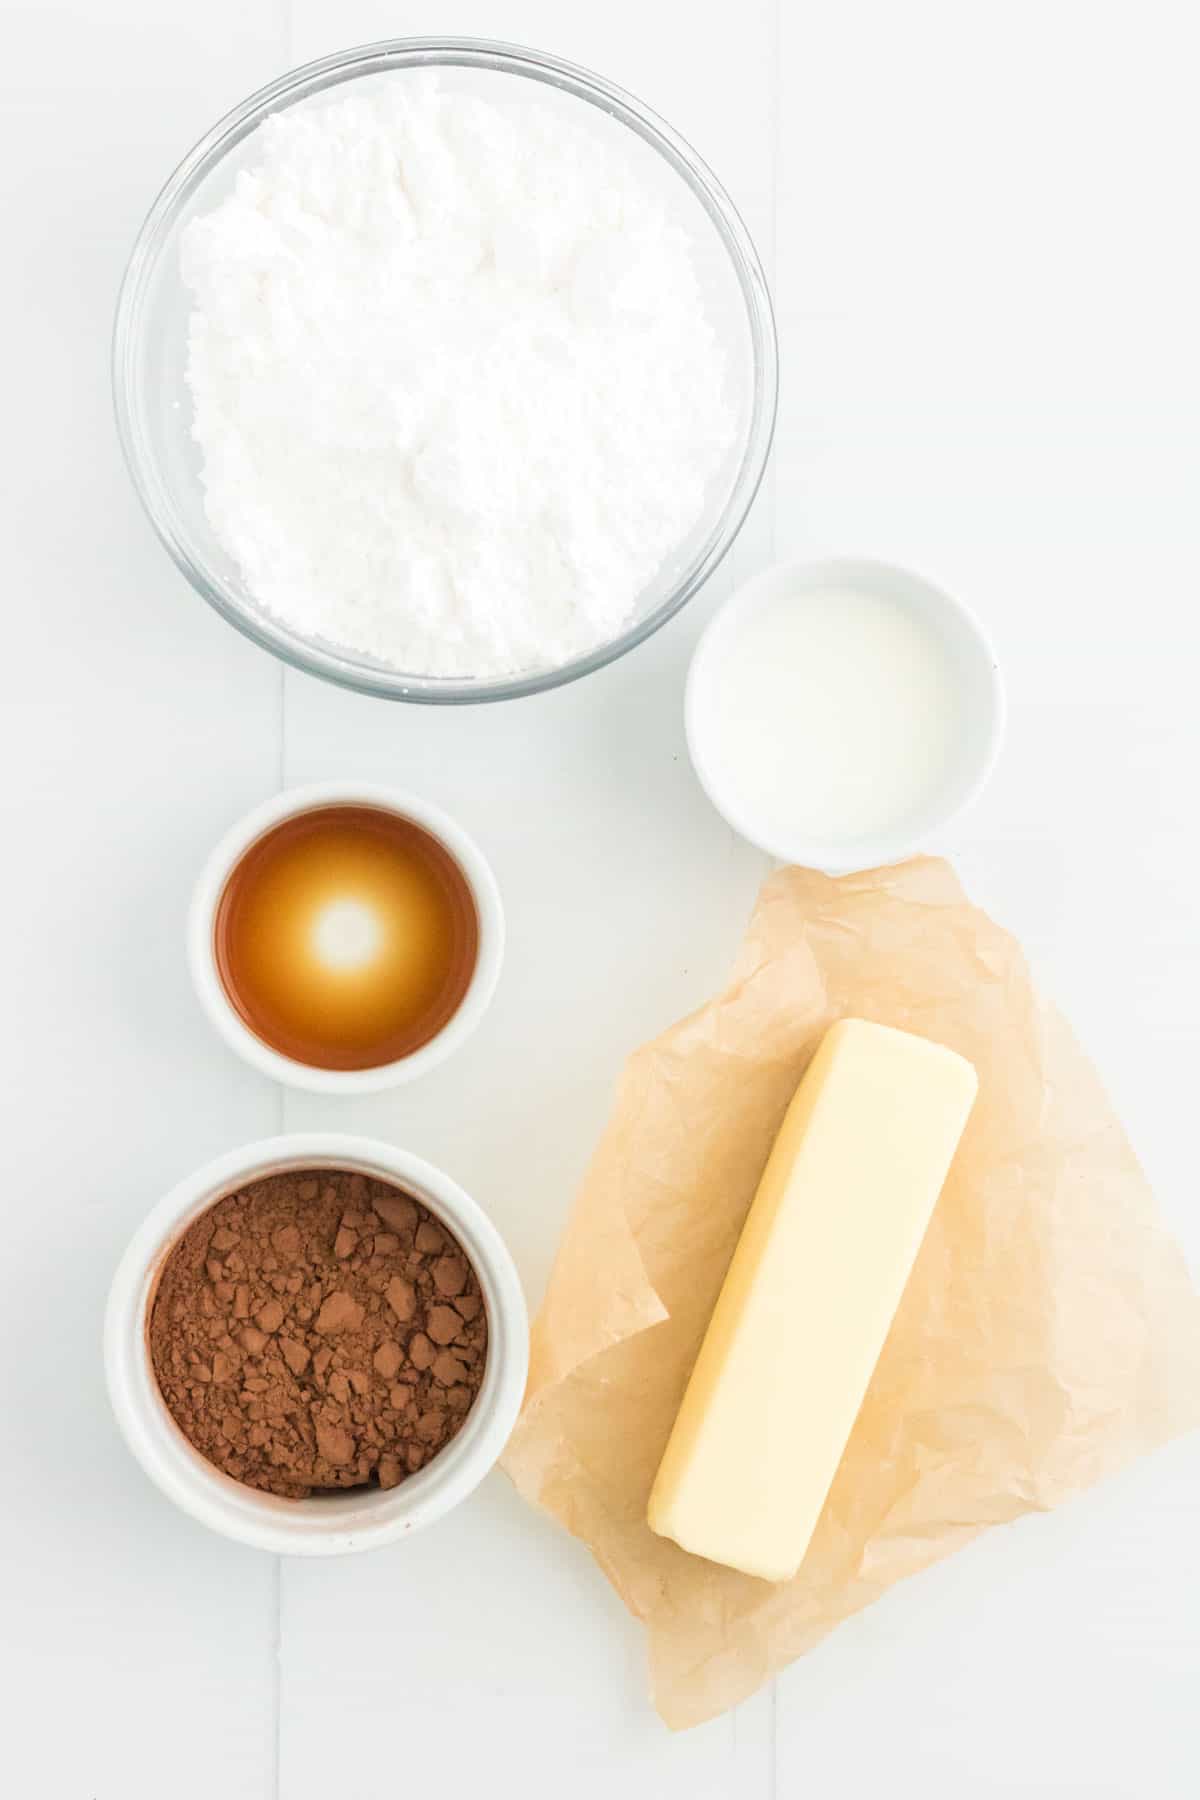 A stick of butter and bowls of ingredients for making the chocolate frosting.